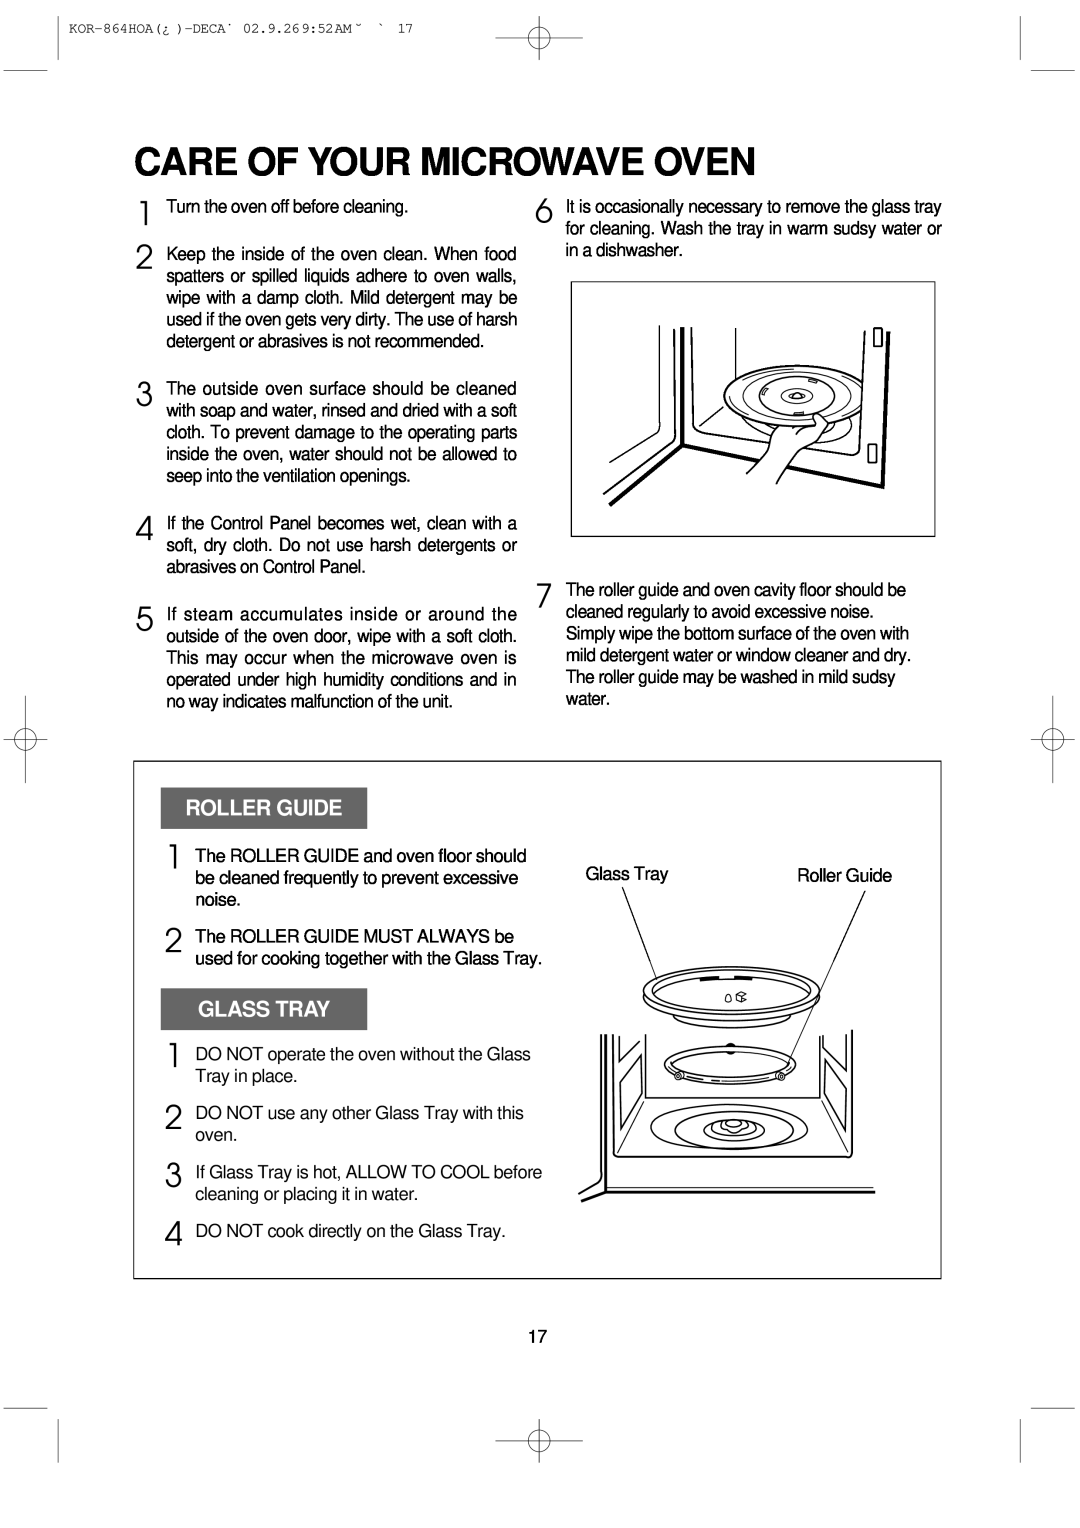 Daewoo KOR-864H operating instructions Care Of Your Microwave Oven, Roller Guide, Glass Tray 